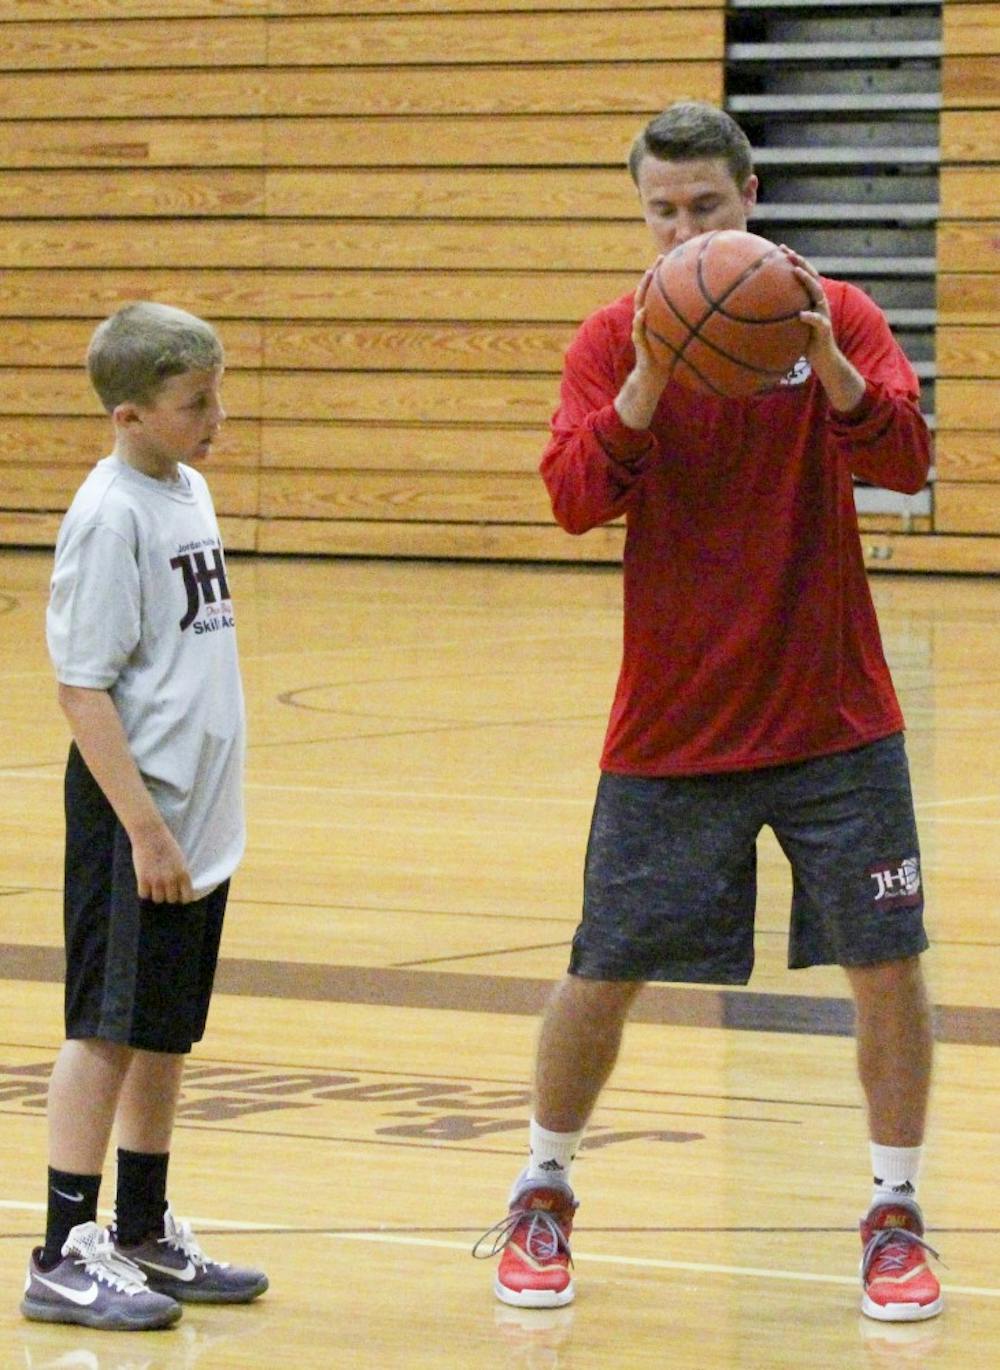 Jordan Hulls teaches students basketball skills Wednesday afternoon for his basketball camp at Bloomington South High School. “I want to teach theses kids the value of hard work,” Hulls said. 